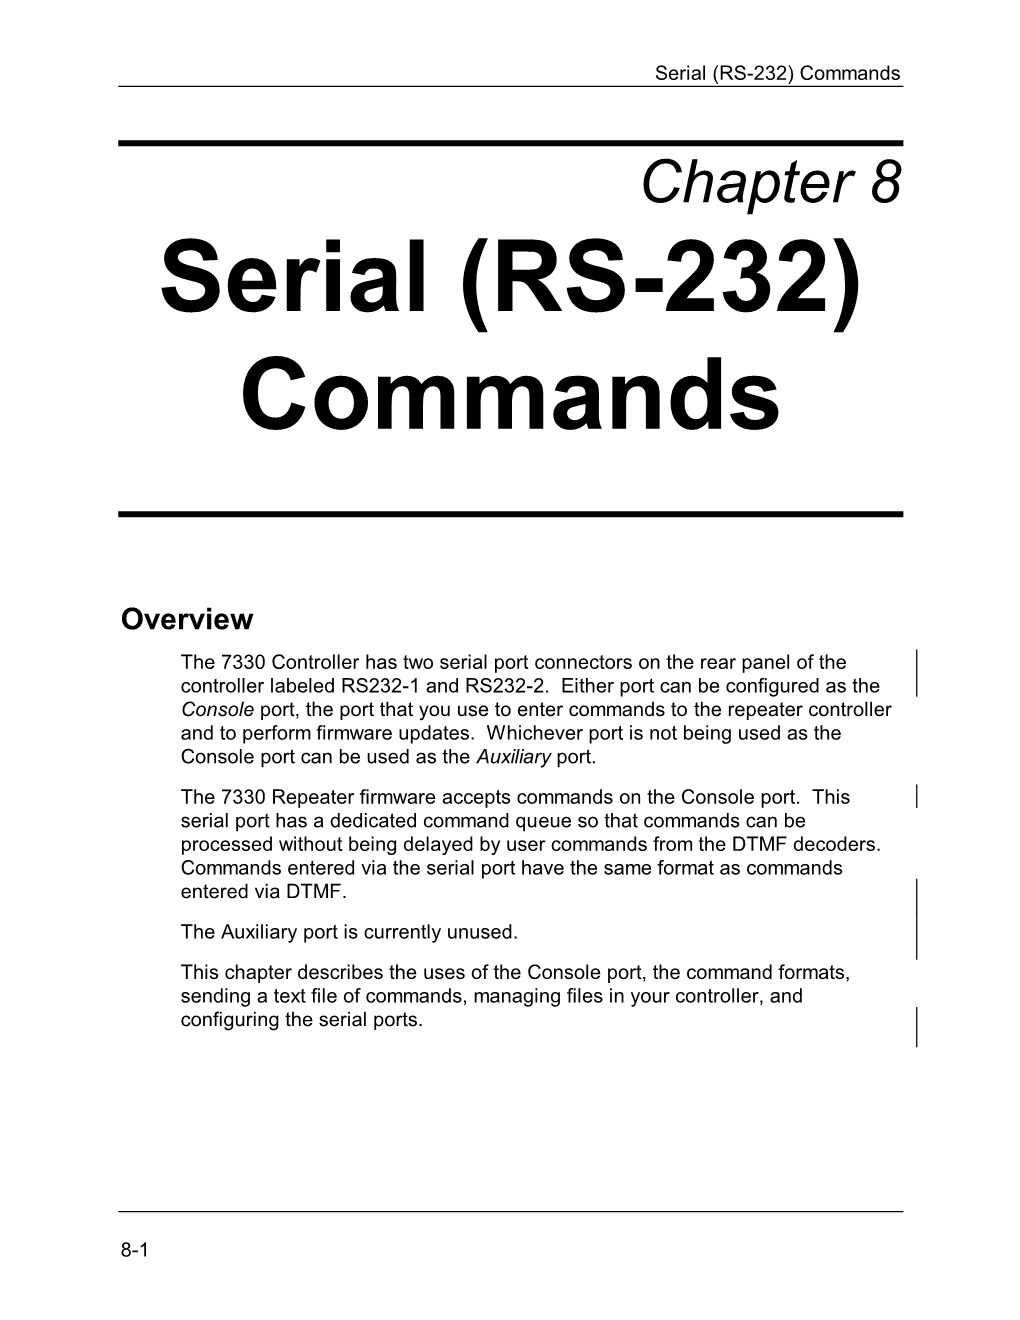 Serial (RS-232) Commands